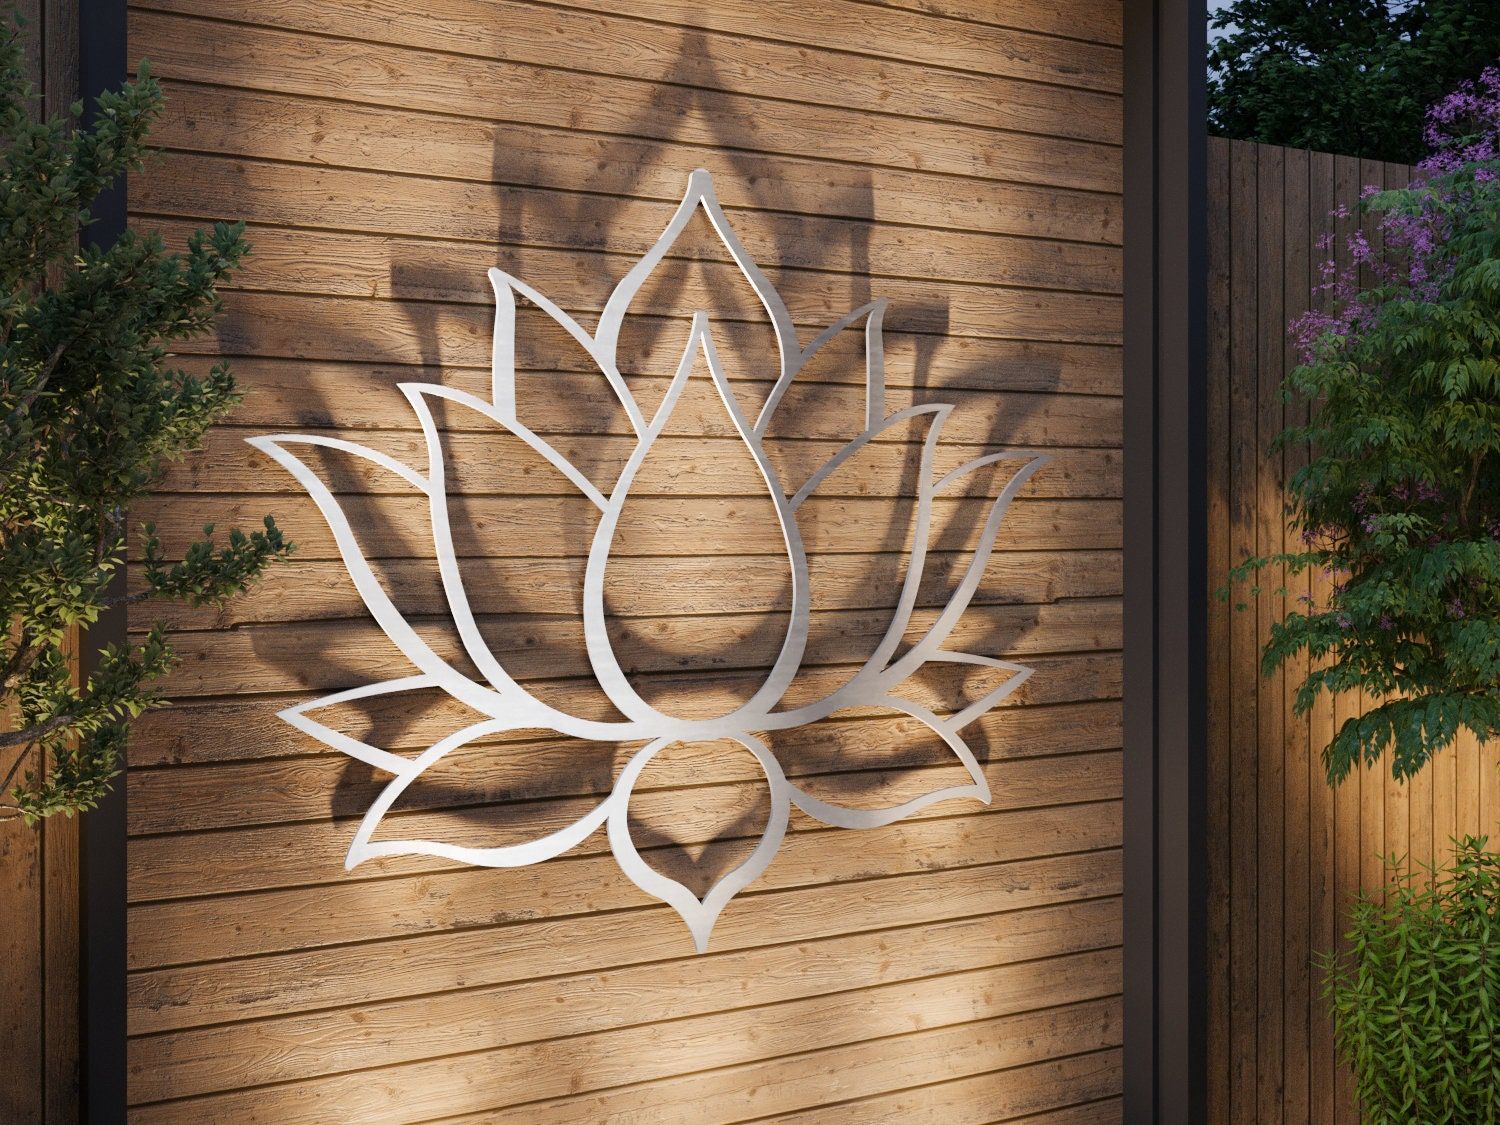 Lotus Flower Large Outdoor Metal Wall Art, Garden Within 2018 Landscape Wall Art (View 8 of 20)